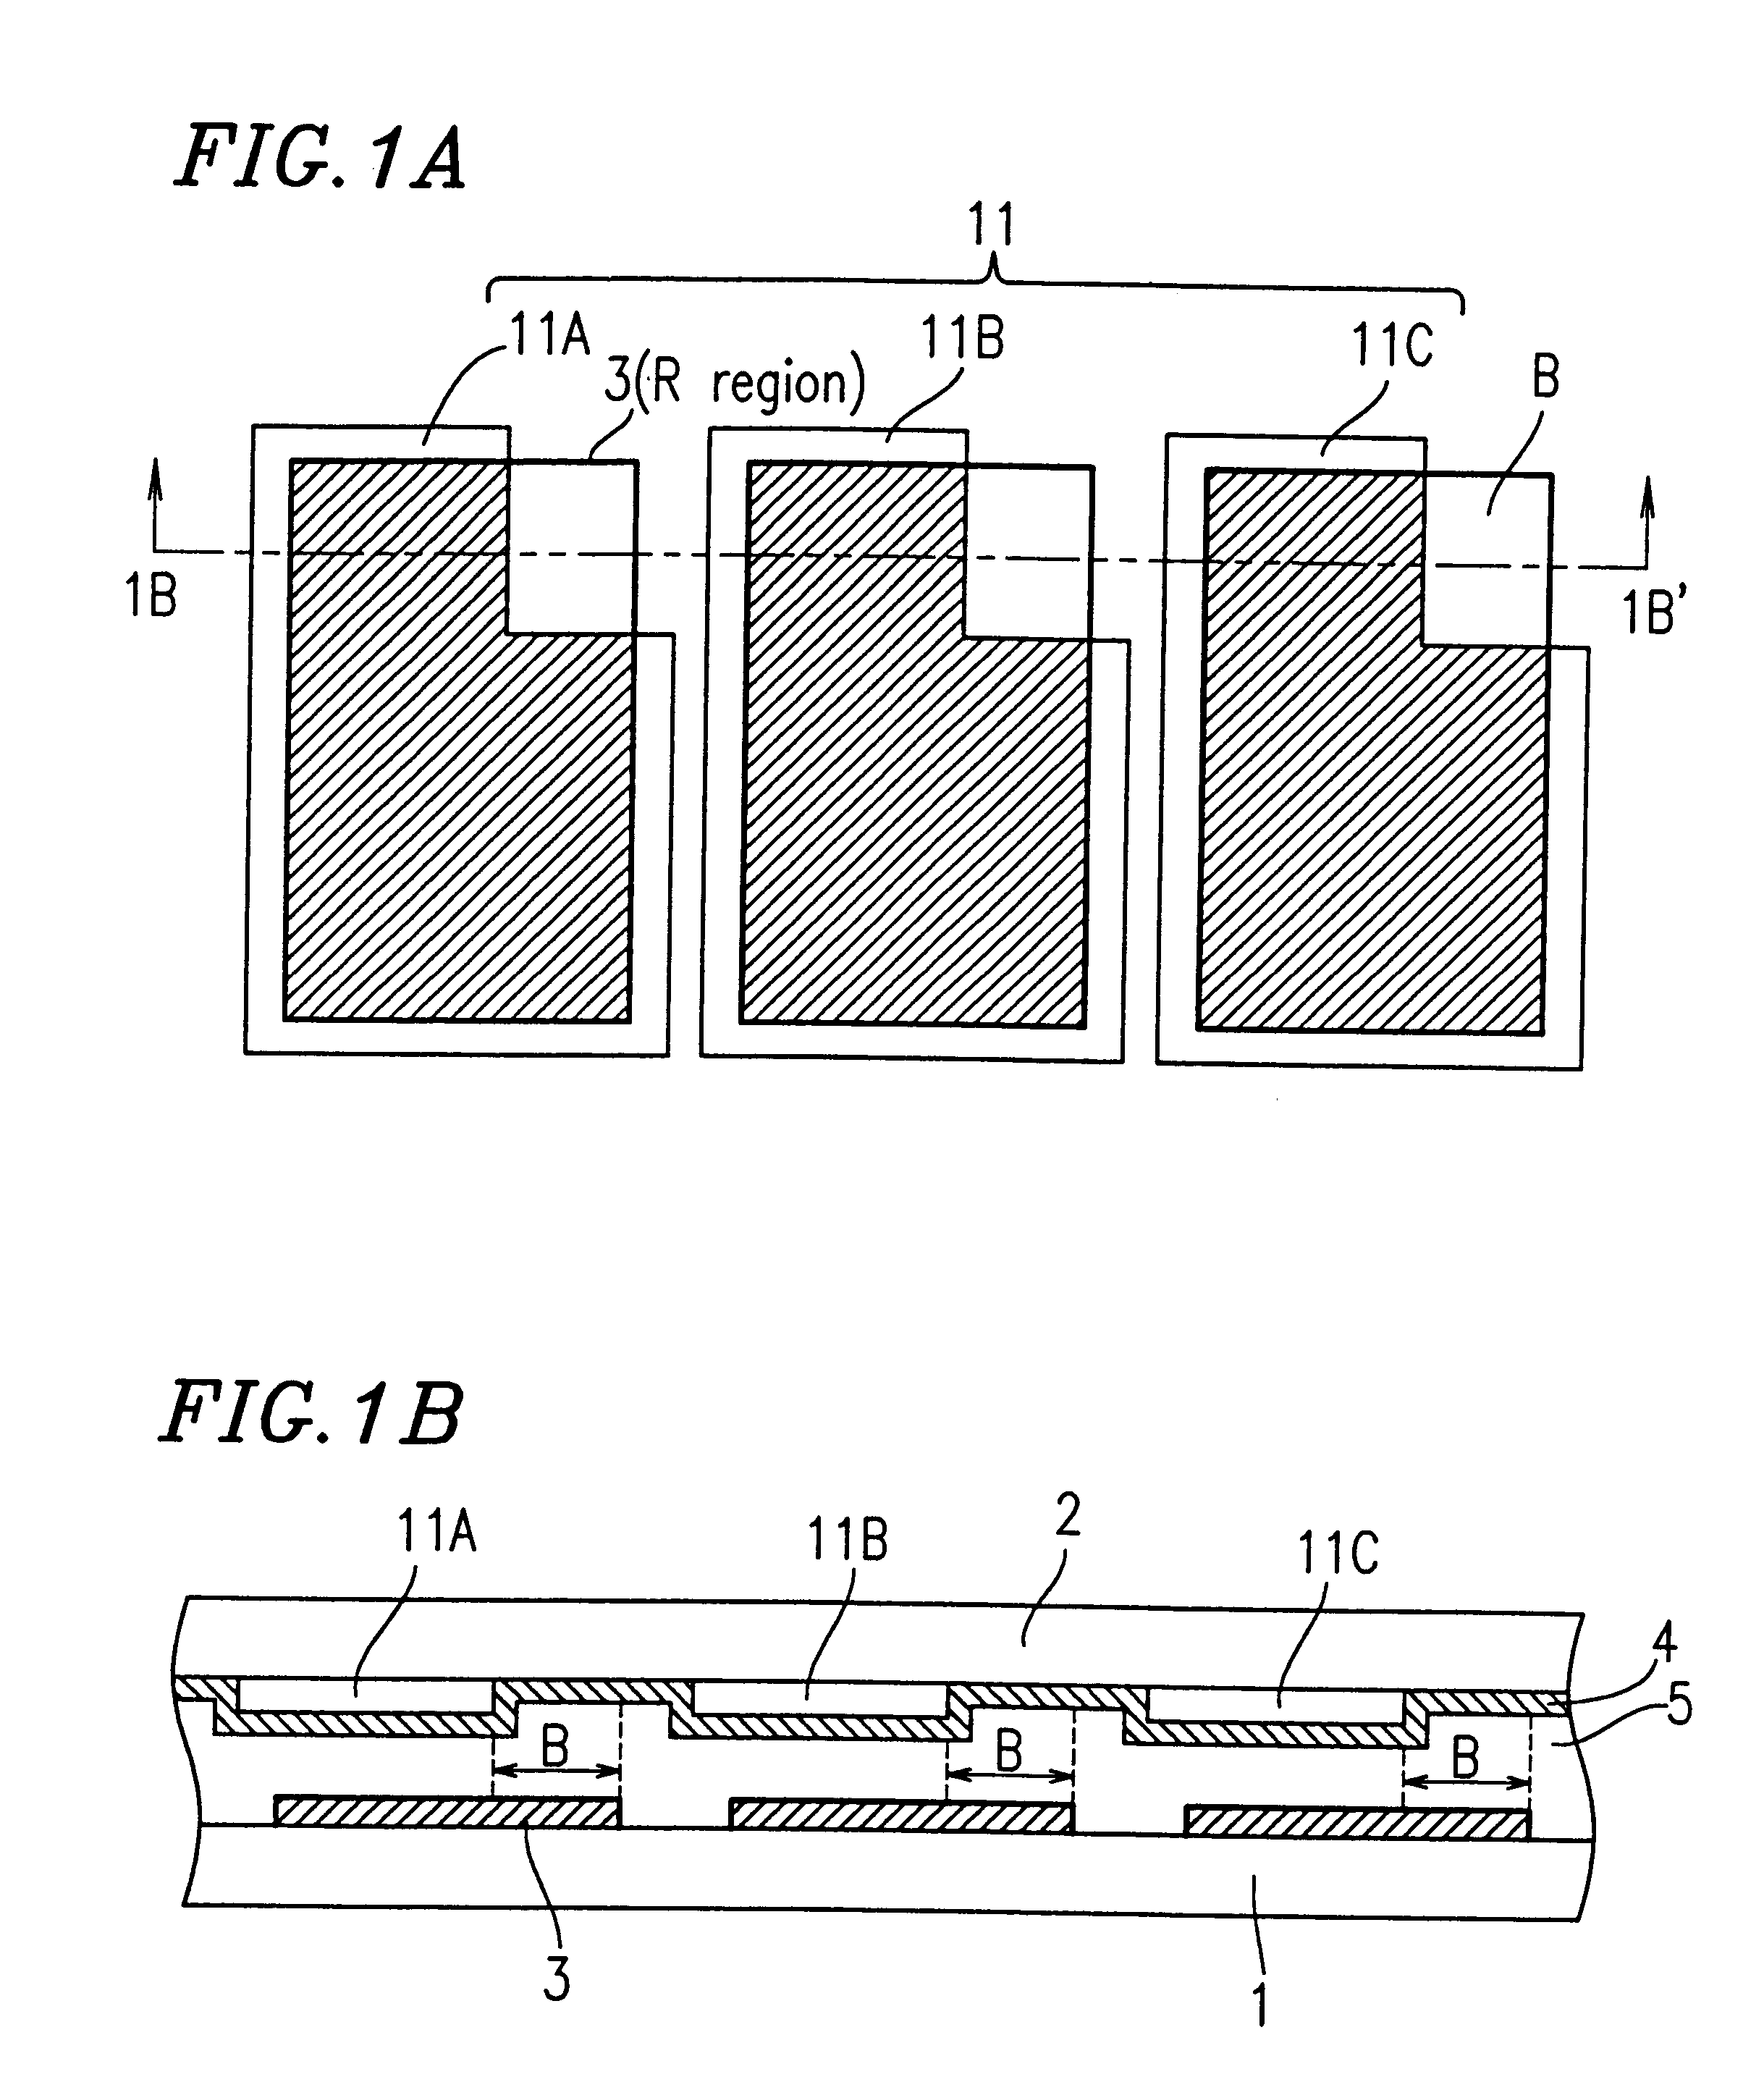 Liquid crystal display including both color filter and non-color filter regions for increasing brightness